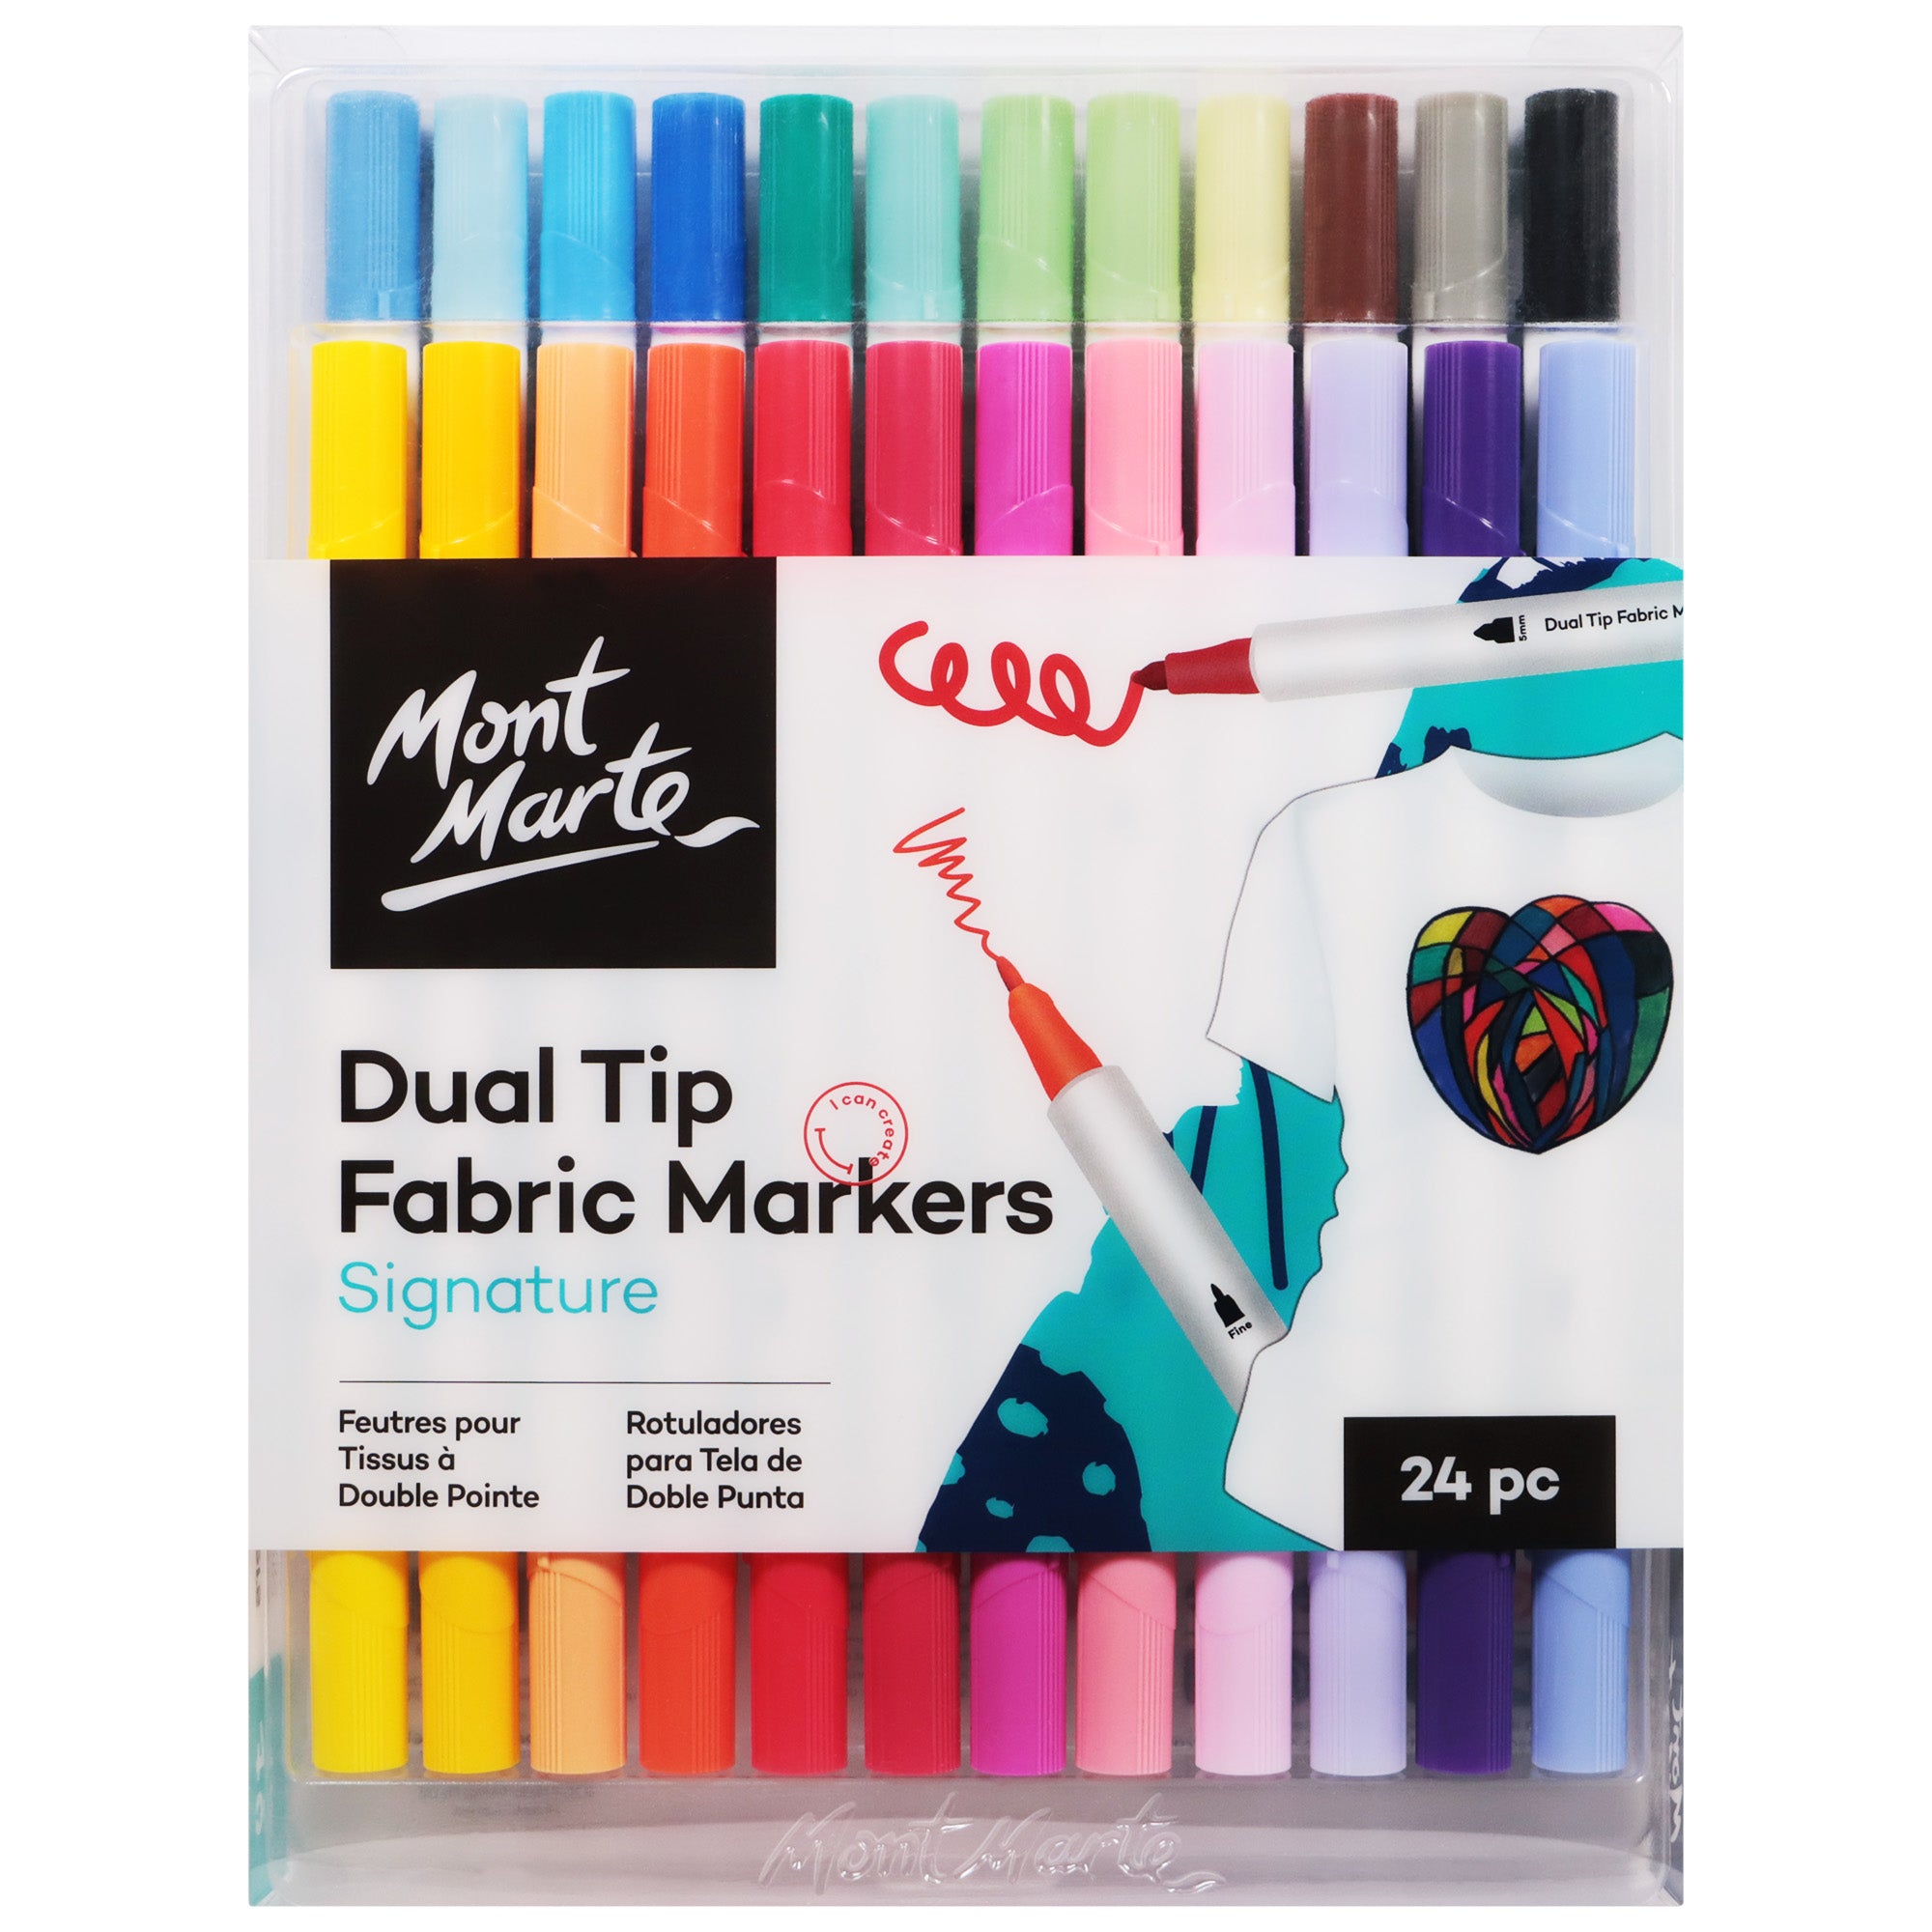 Mont Marte Dual Tip Fabric Markers - Dollars and Sense